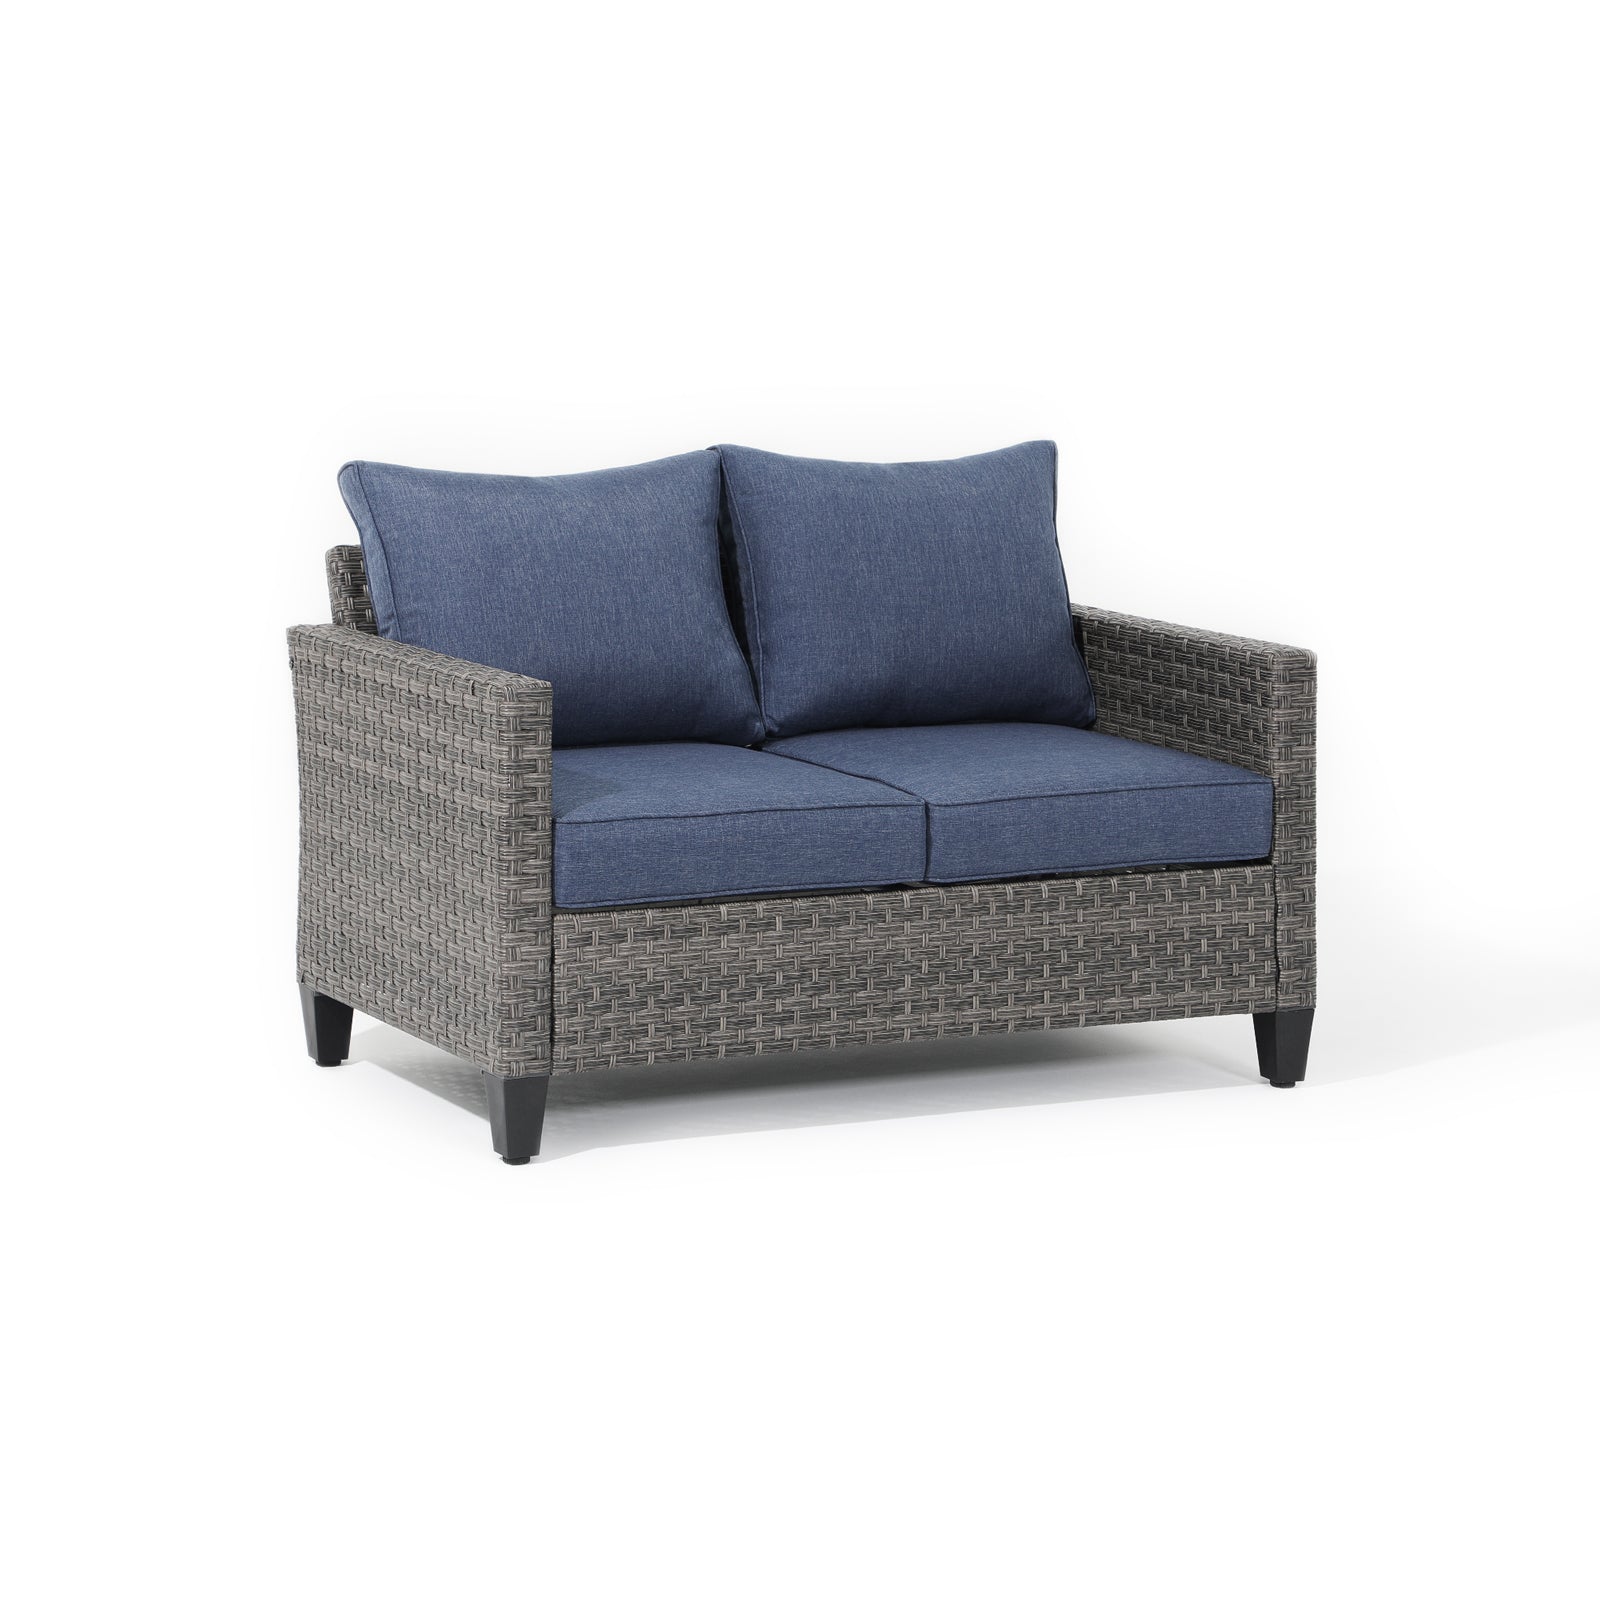 Ayia rattan design outdoor loveseat with navy blue cushions, right angle - Jardina Furniture #color_Navy blue